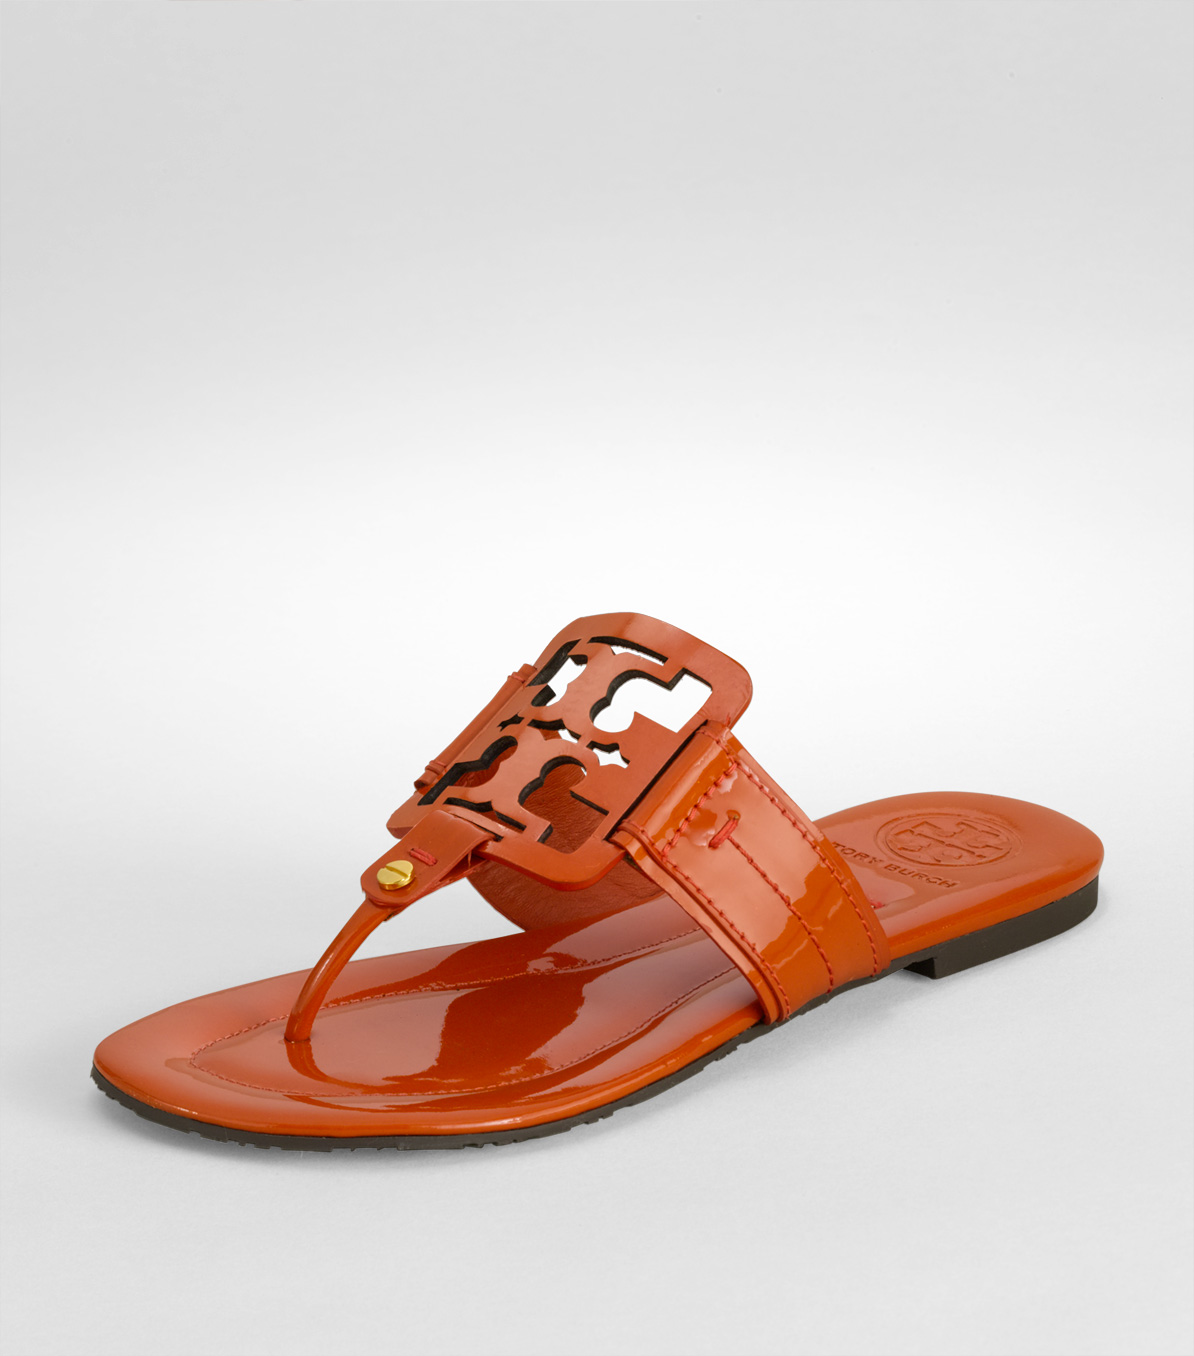 Tory Burch Square Miller Patent Leather Thong Sandals in Orange